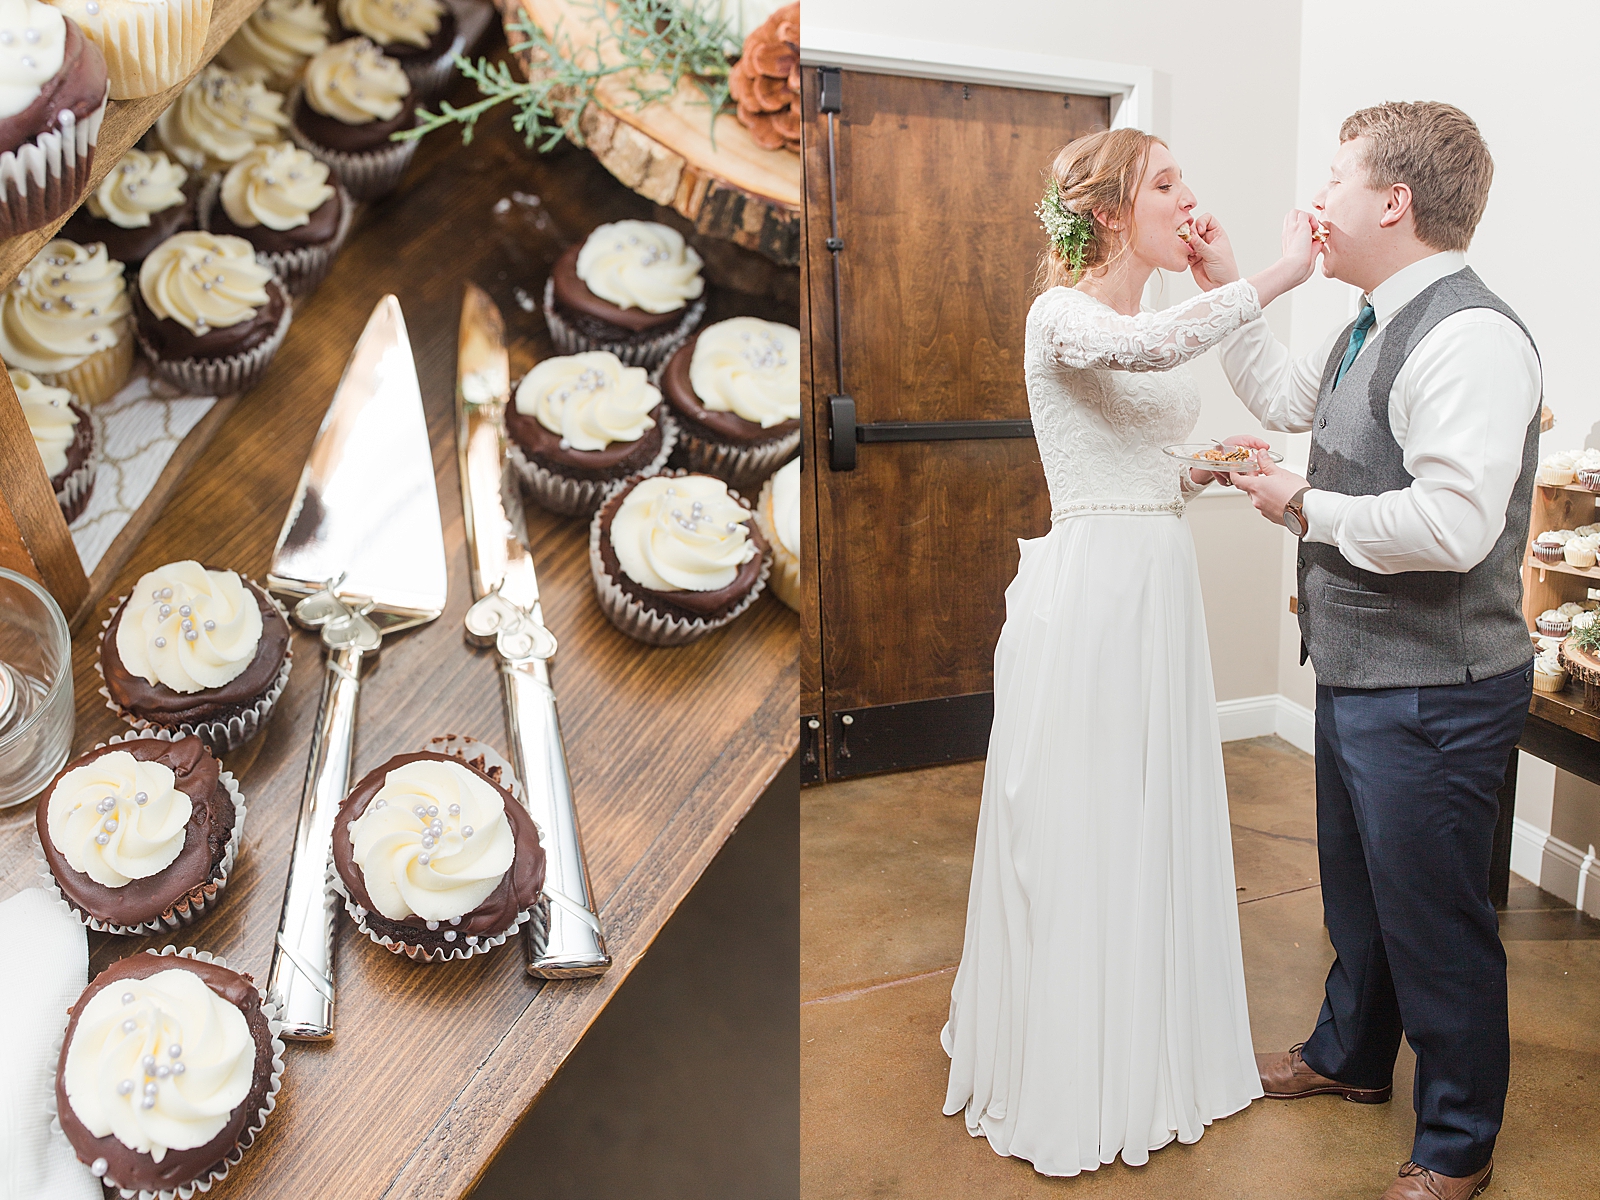 Charlotte Wedding Reception Cupcakes with cutting utensils and Bride and Groom Feeding Each other Cake Photos